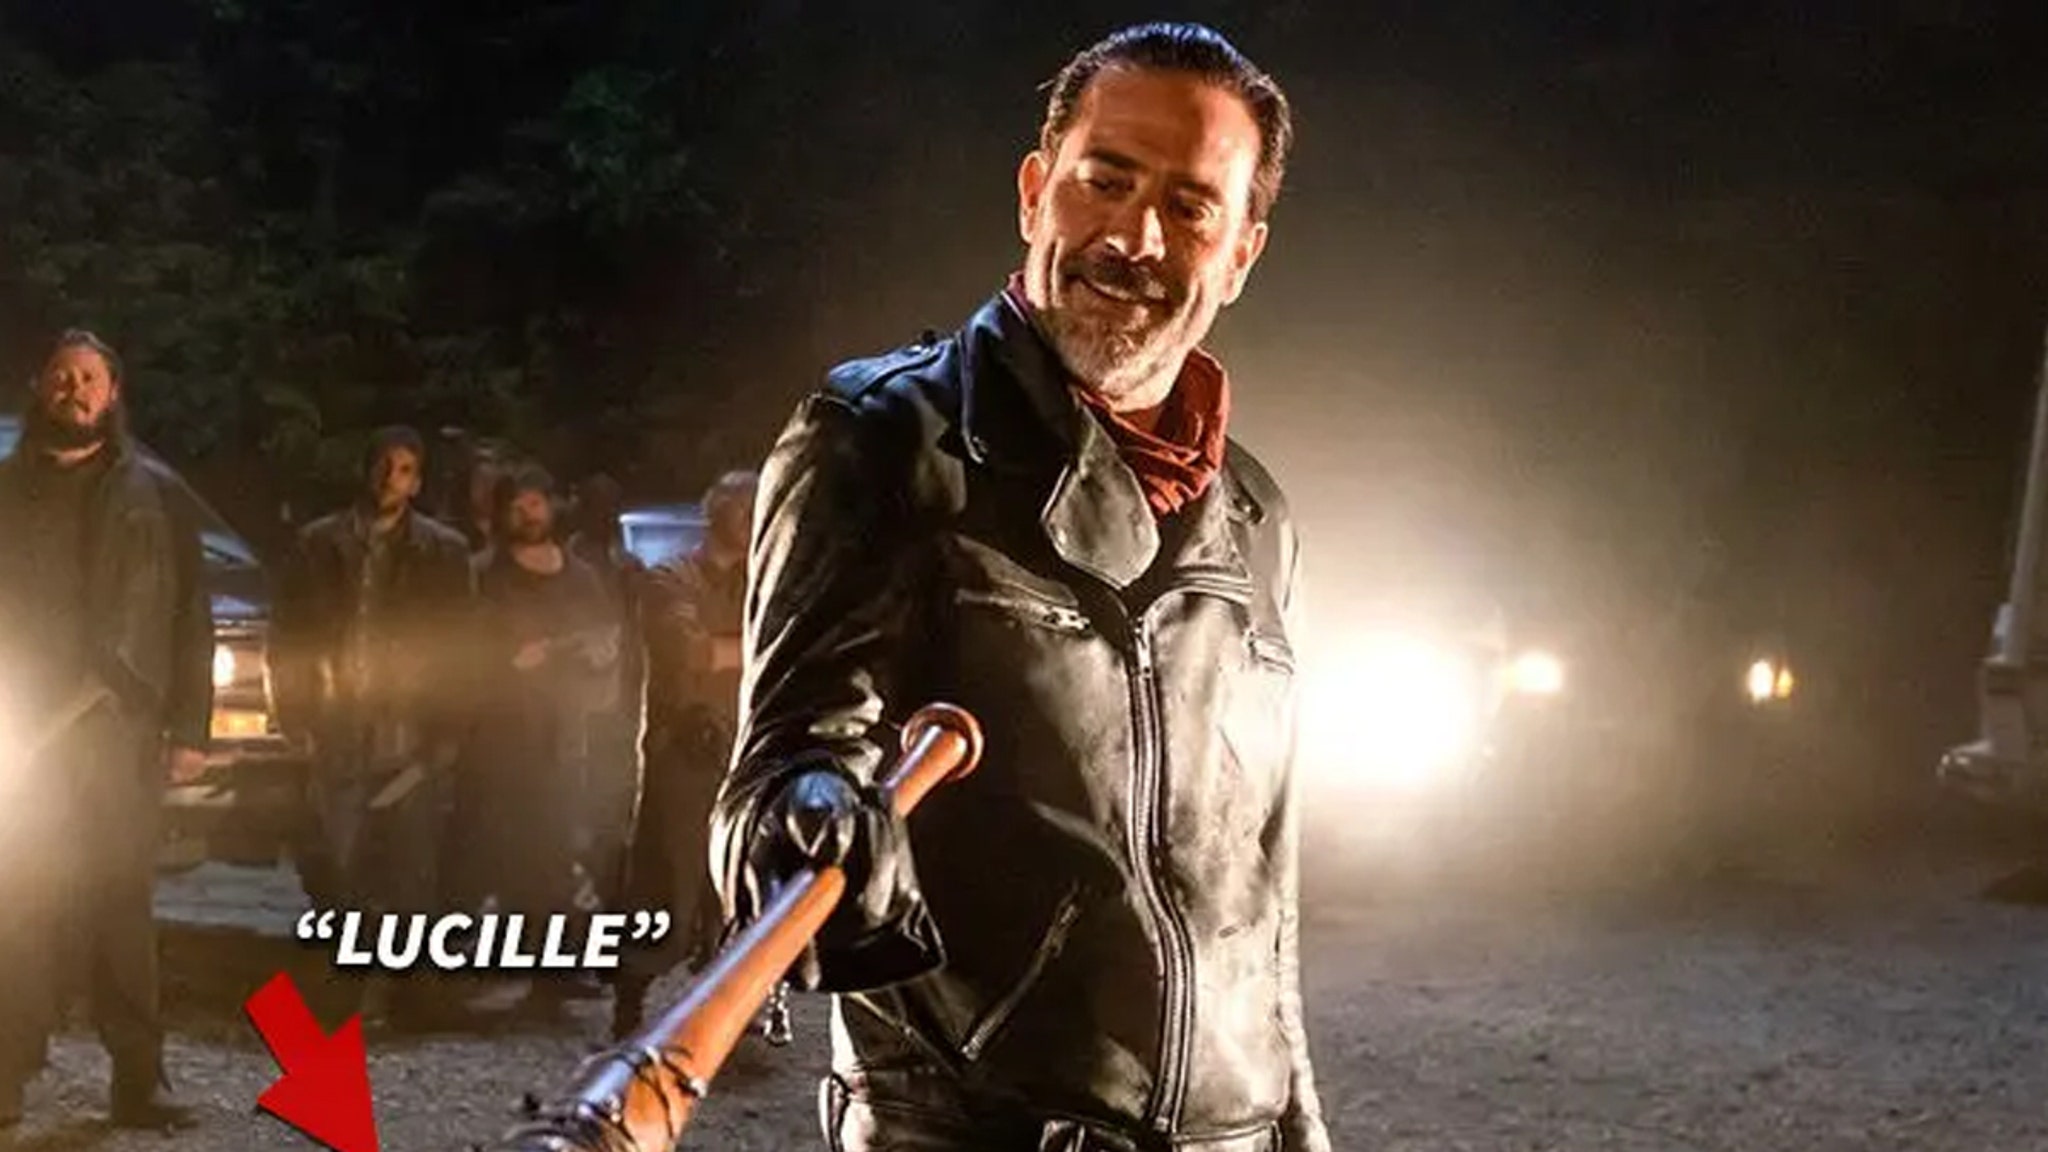 Negan 'Lucille' Barbed Wire Bat From The Walking Dead Hits Auction Block